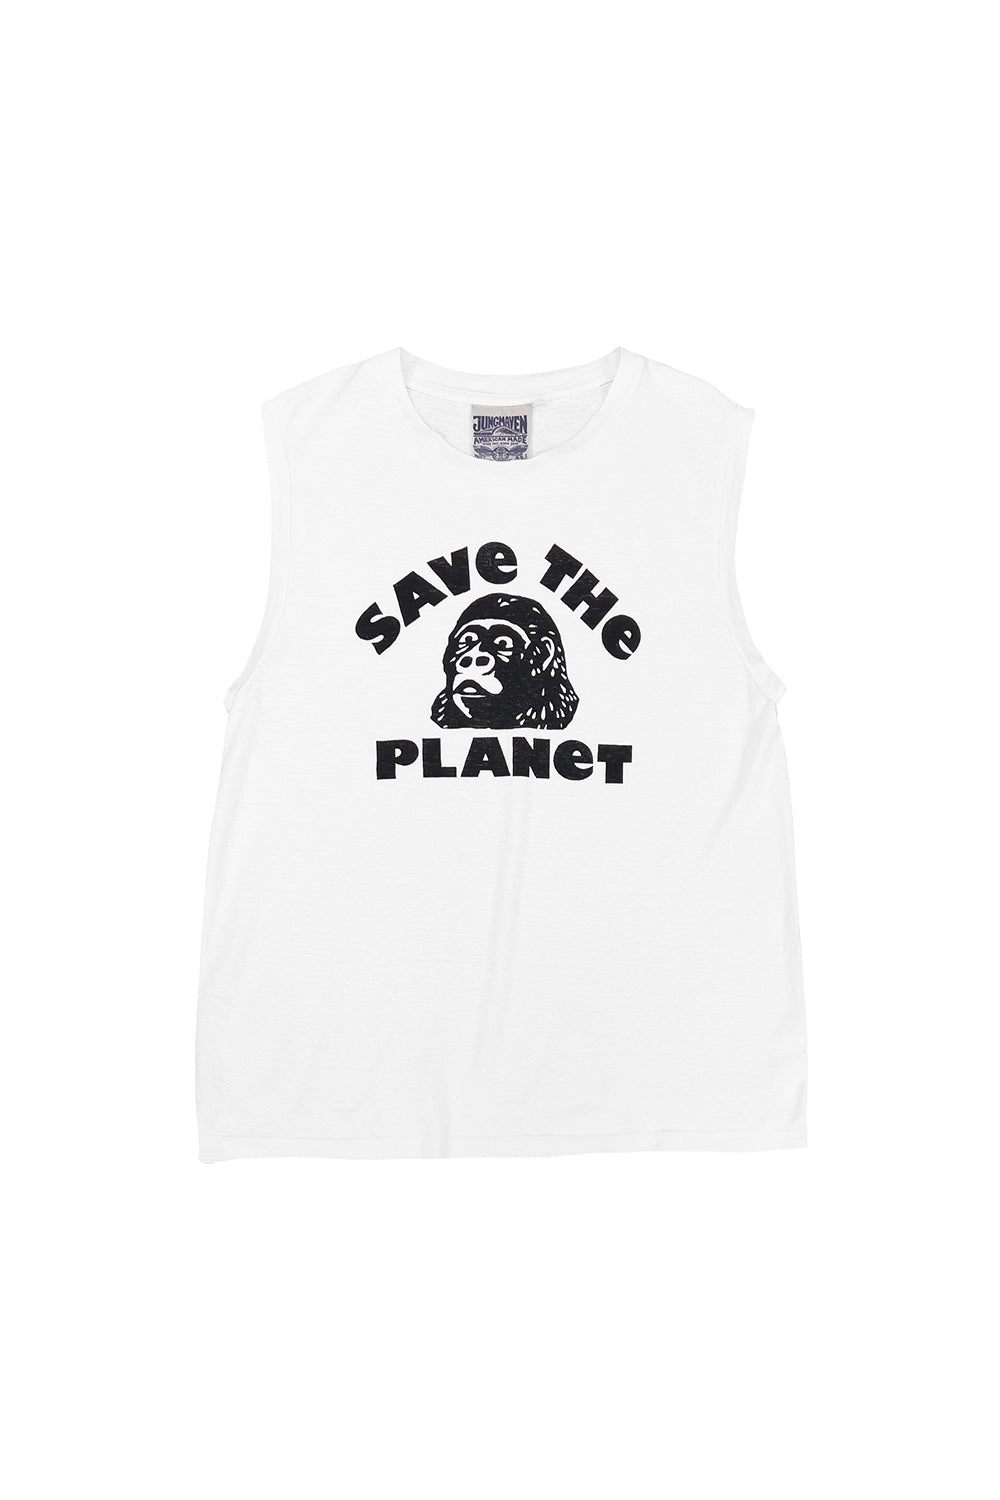 Save the Planet Malibu Muscle Tee | Jungmaven Hemp Clothing & Accessories / Color: Washed White